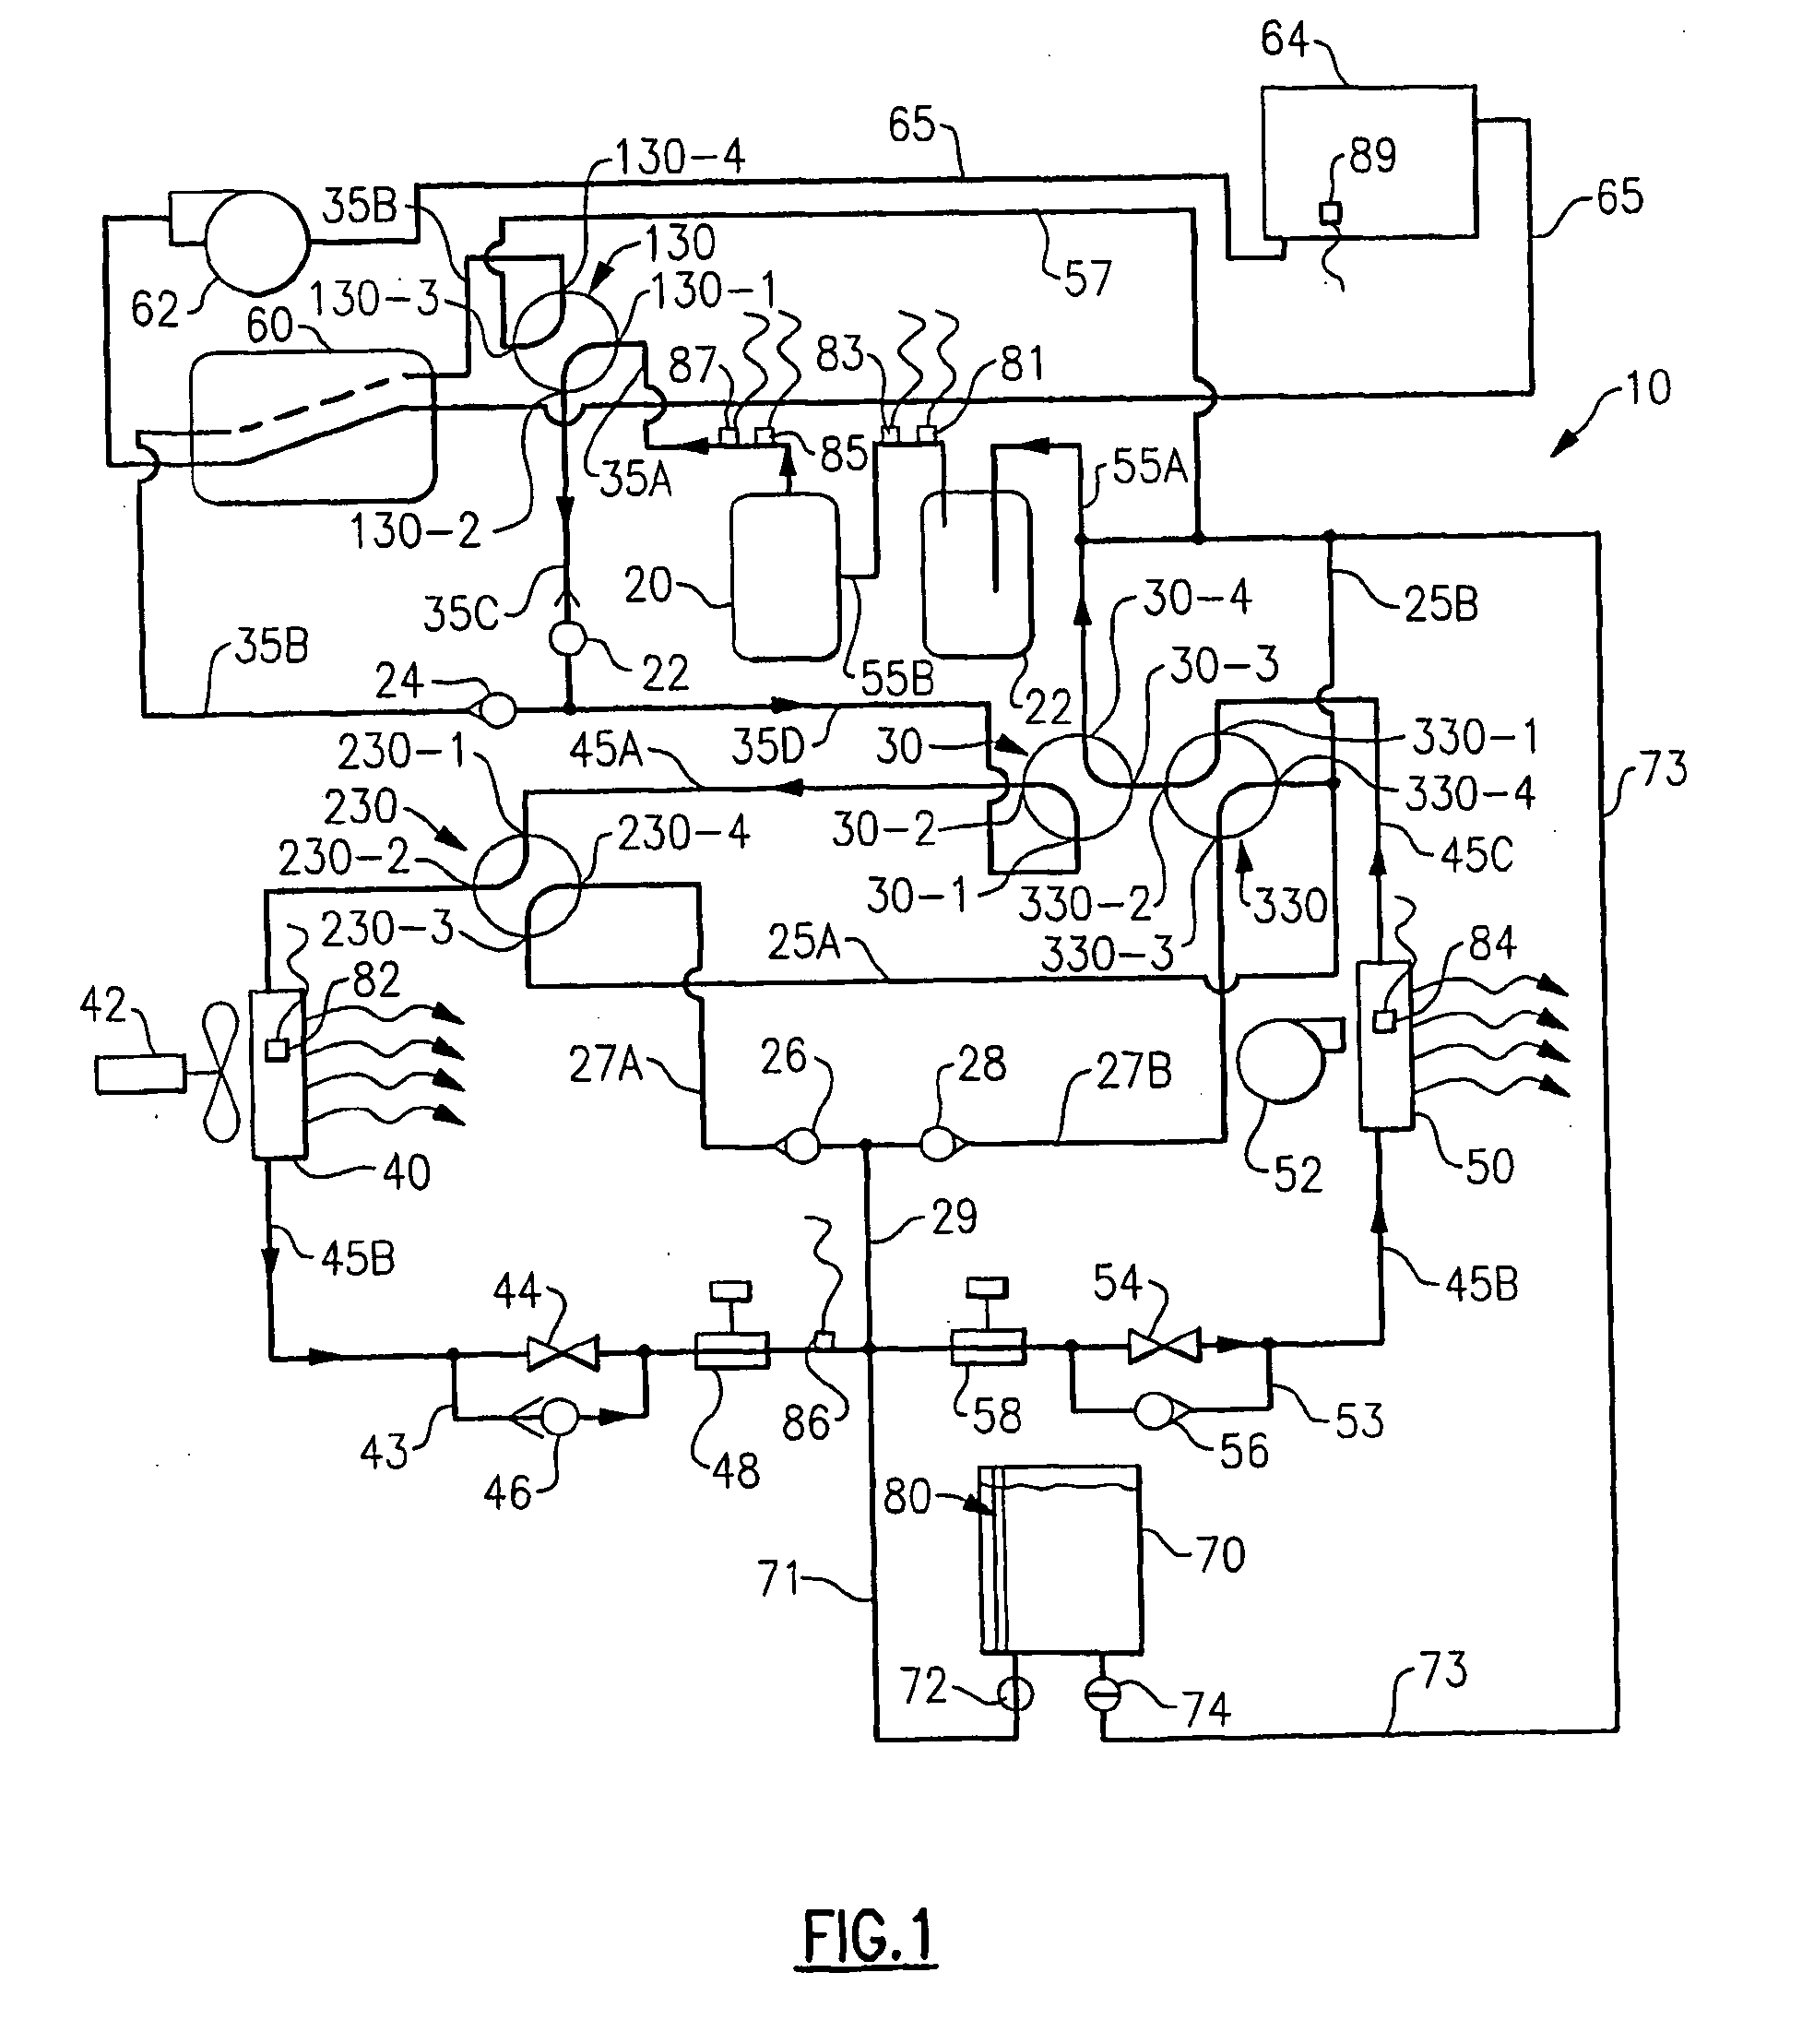 Heat pump system having auxiliary water heating and heat exchanger bypass